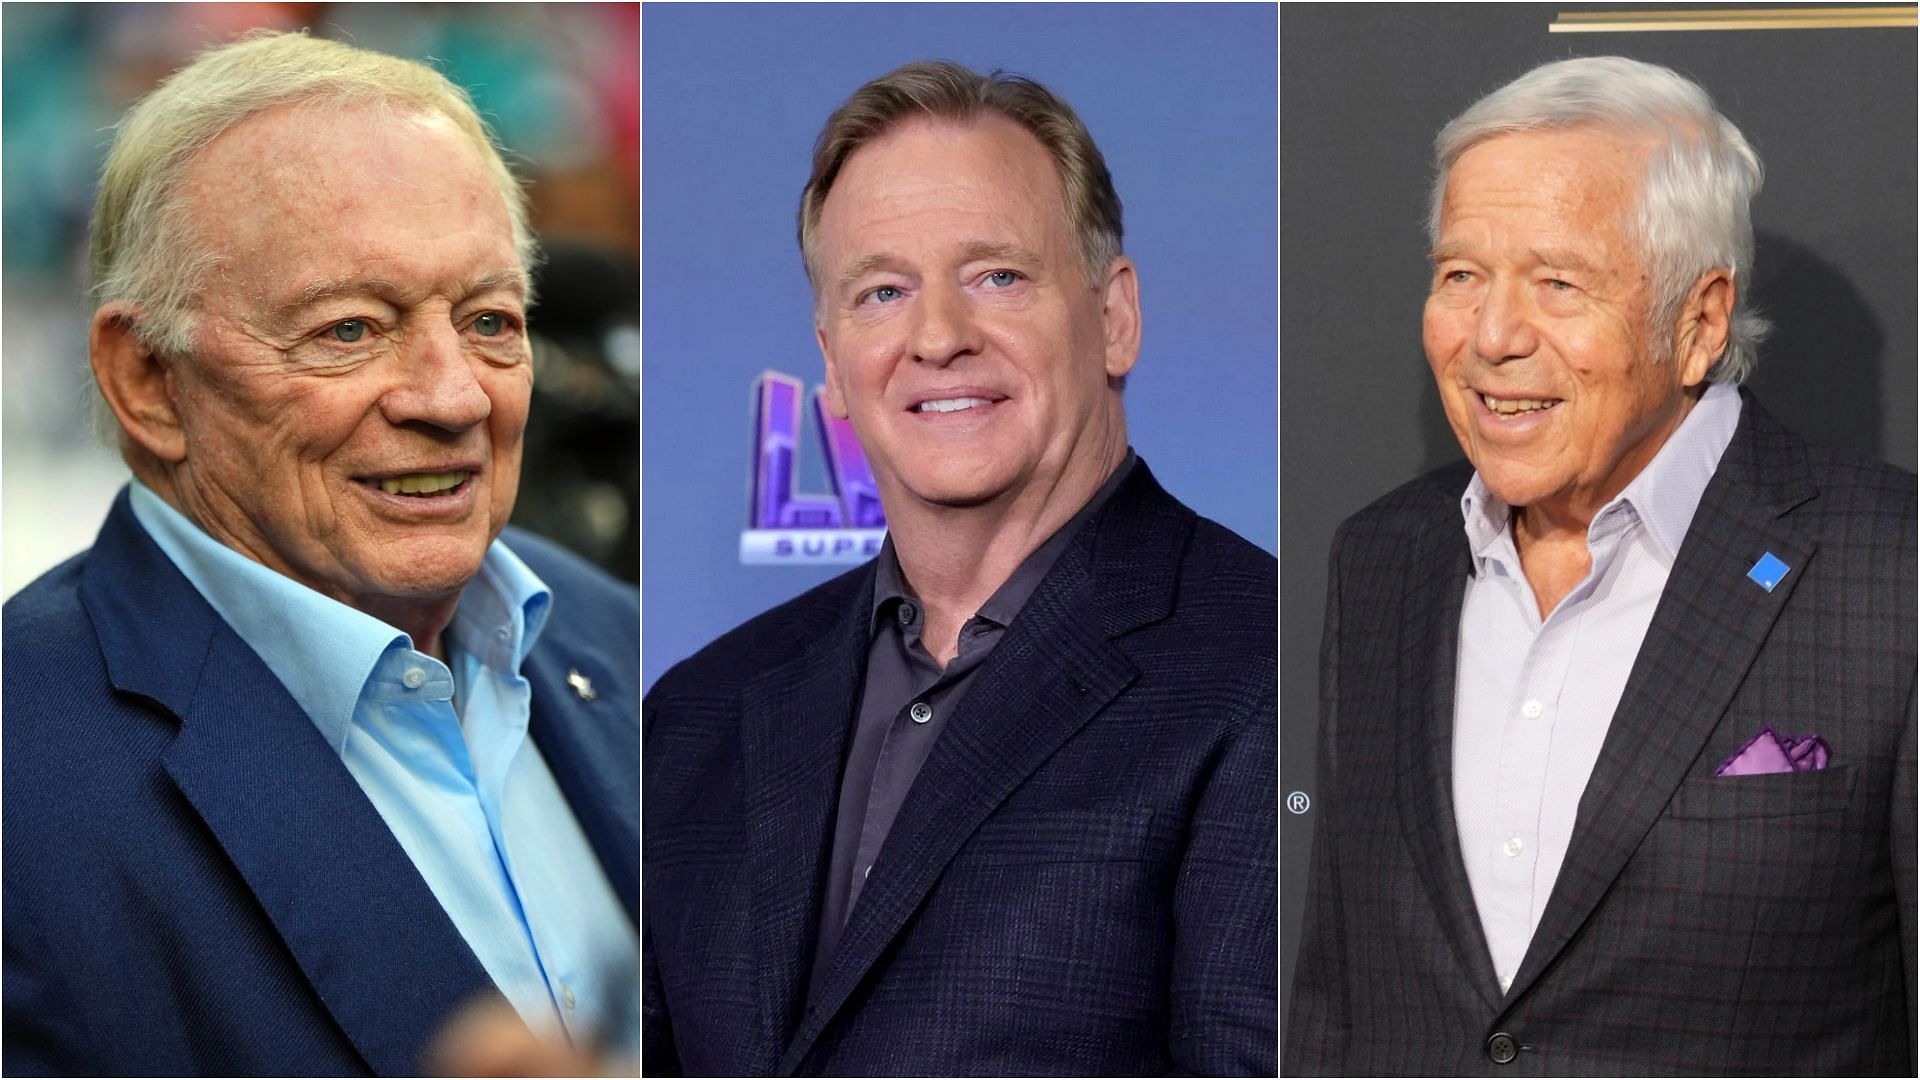 Jerry Jones &amp; Robert Kraft could benefit from the NFL decision on private equity under Roger Goodell  